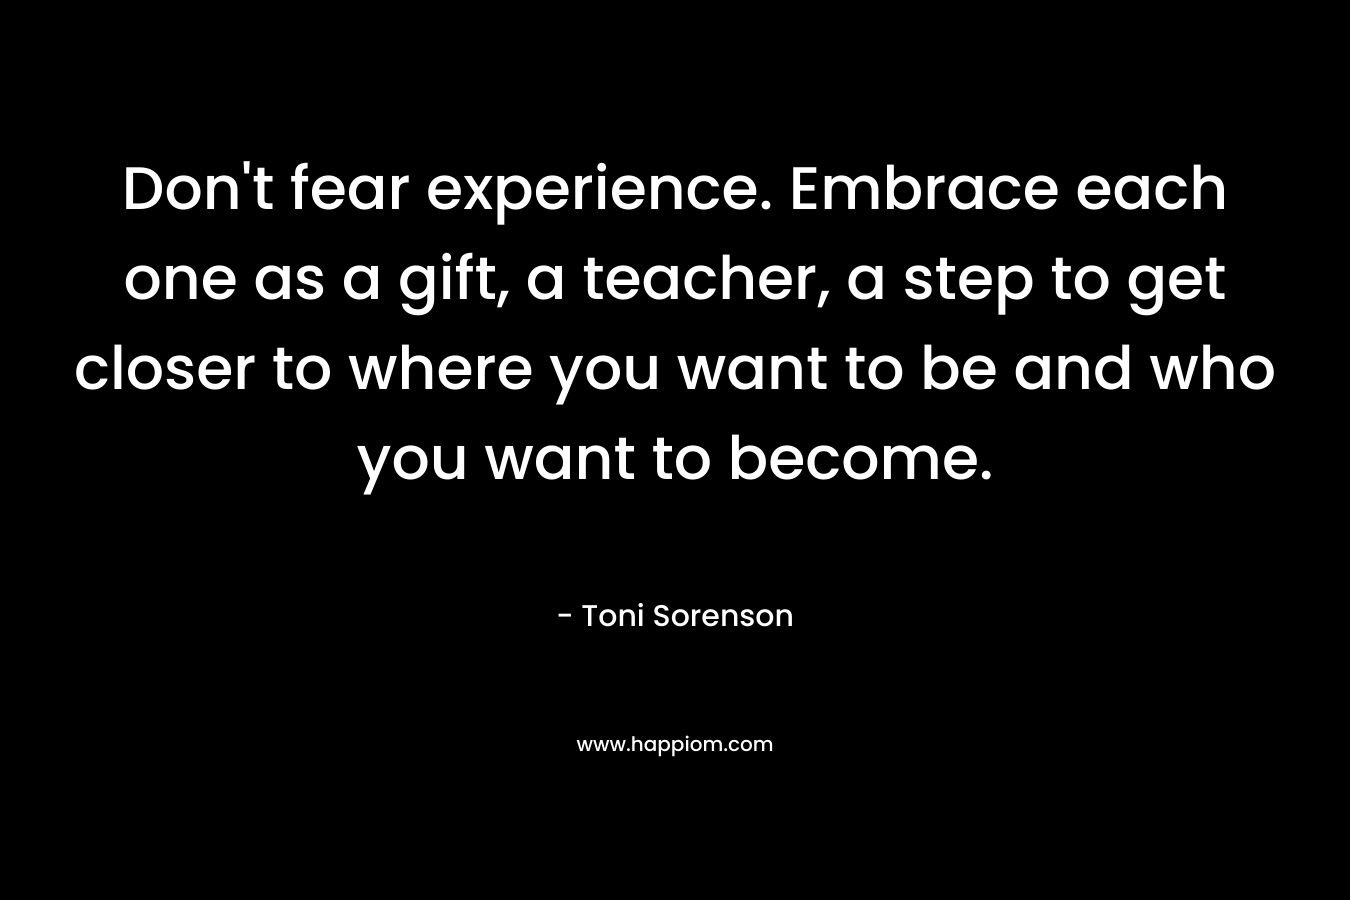 Don't fear experience. Embrace each one as a gift, a teacher, a step to get closer to where you want to be and who you want to become.